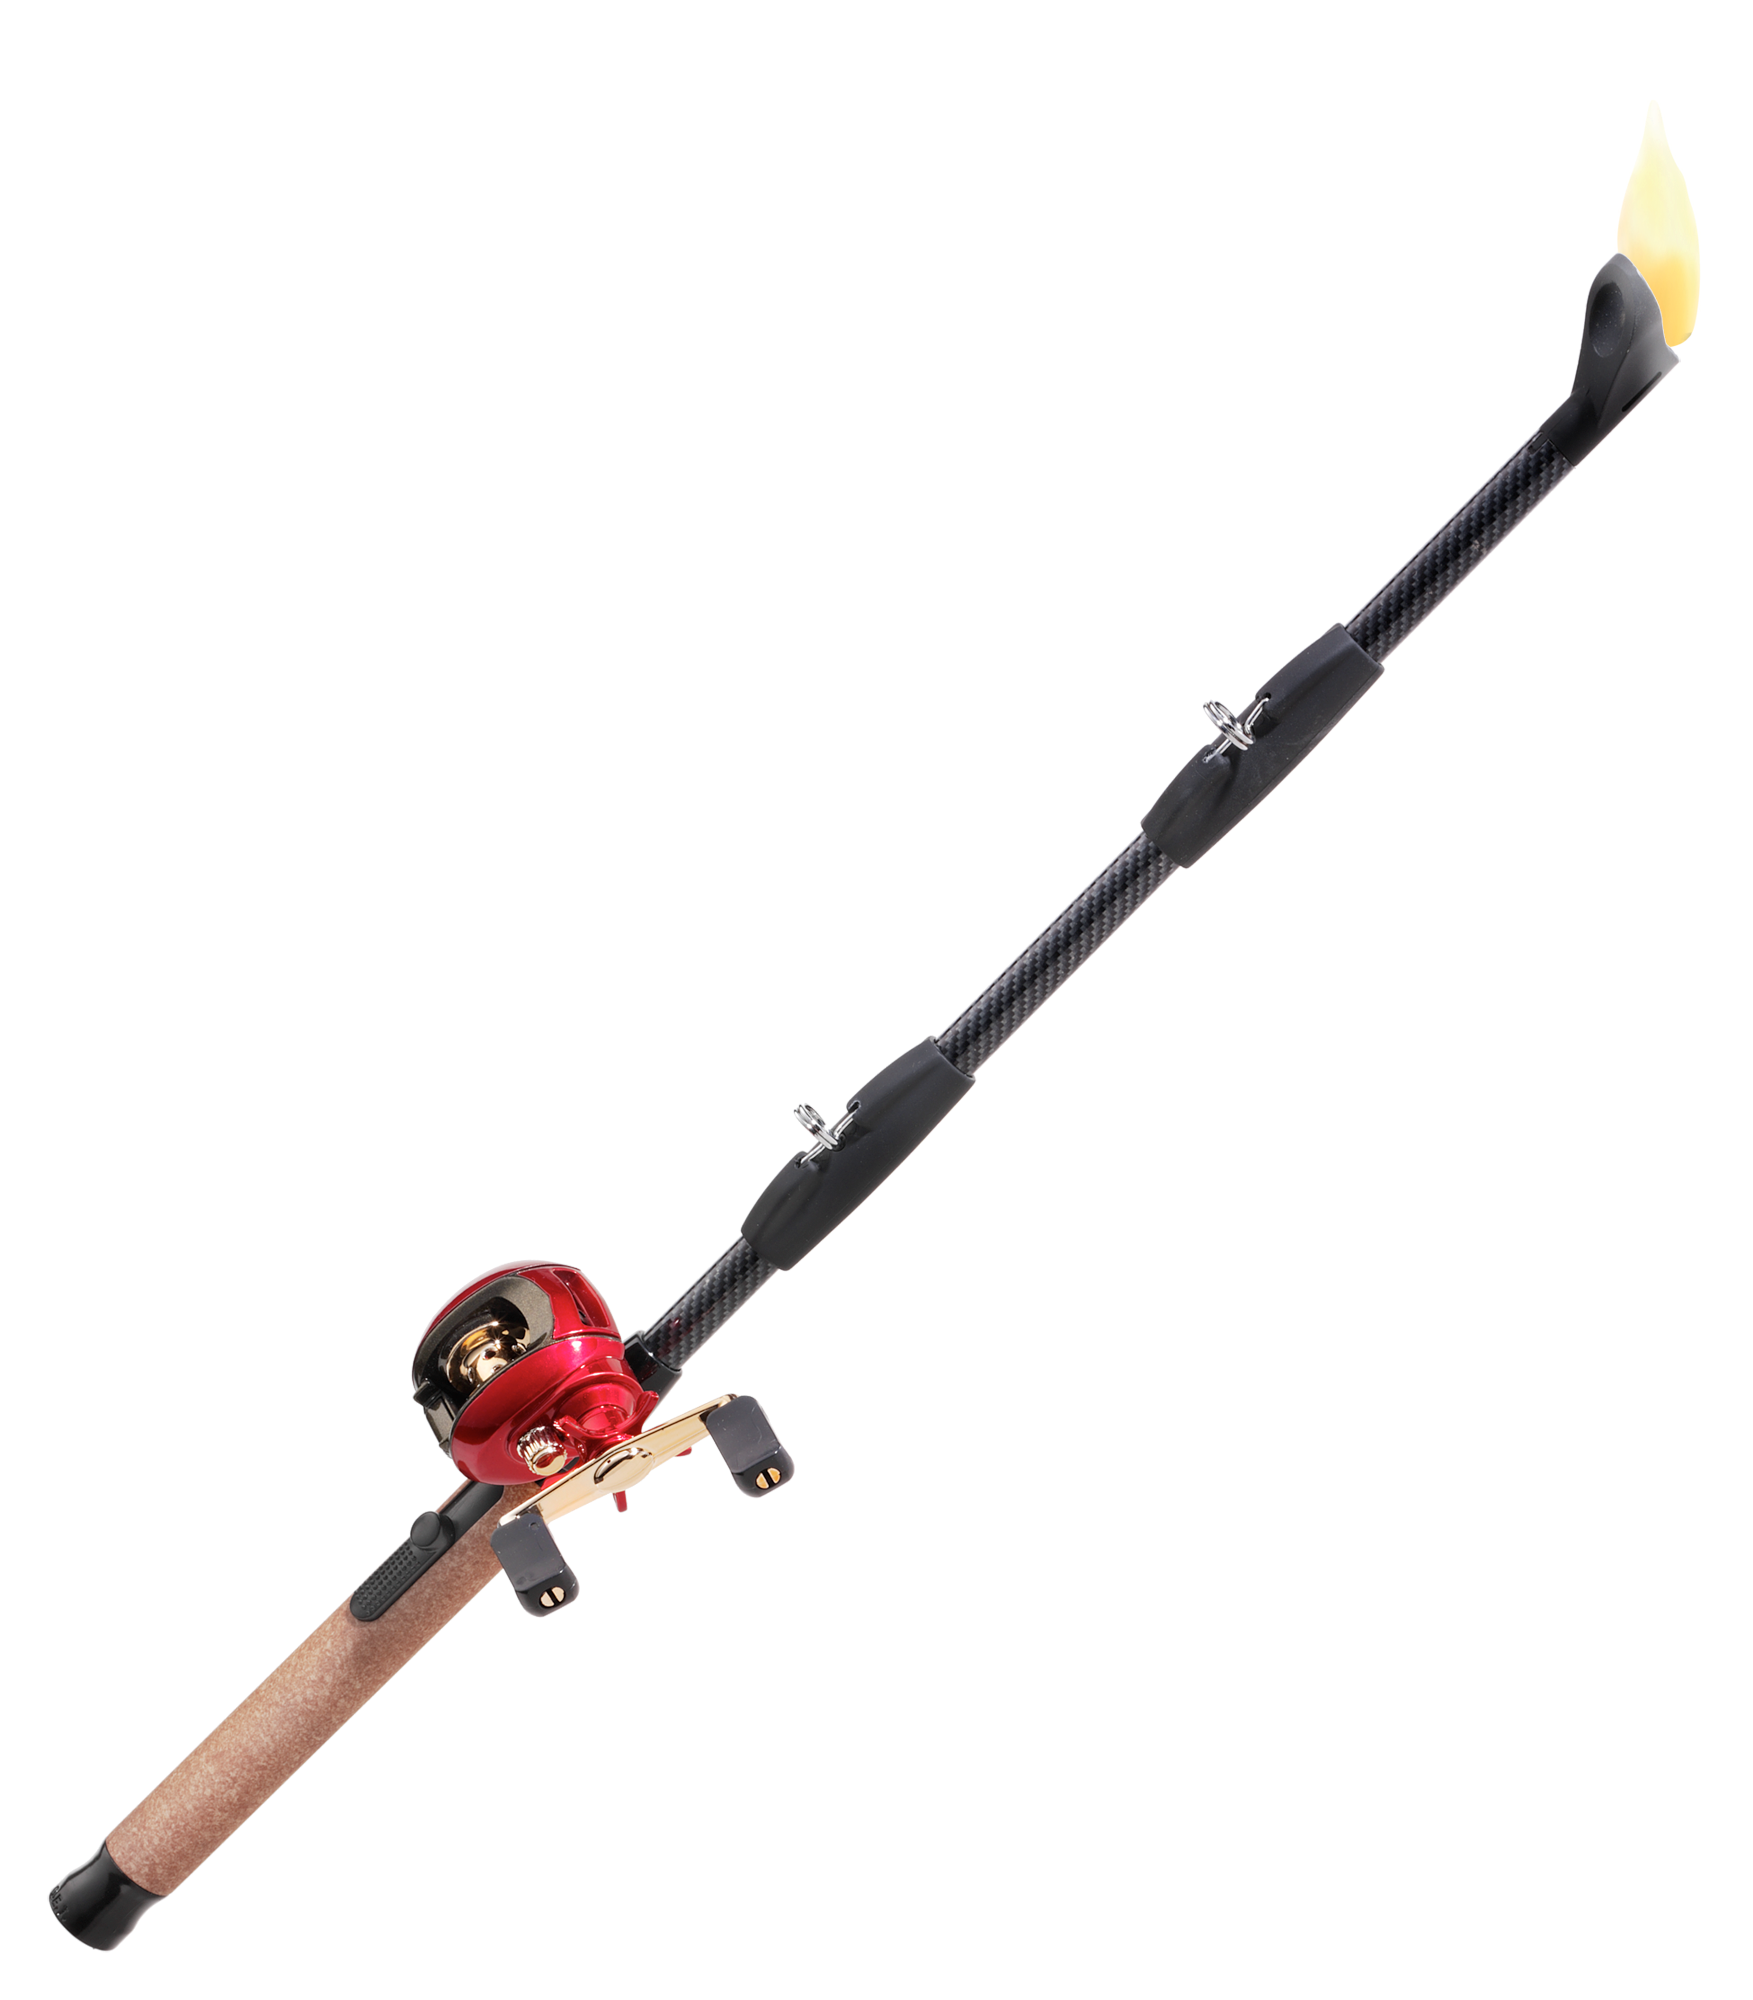  G.E.I. Open Face Fishing Pole BBQ Lighter : Sports & Outdoors